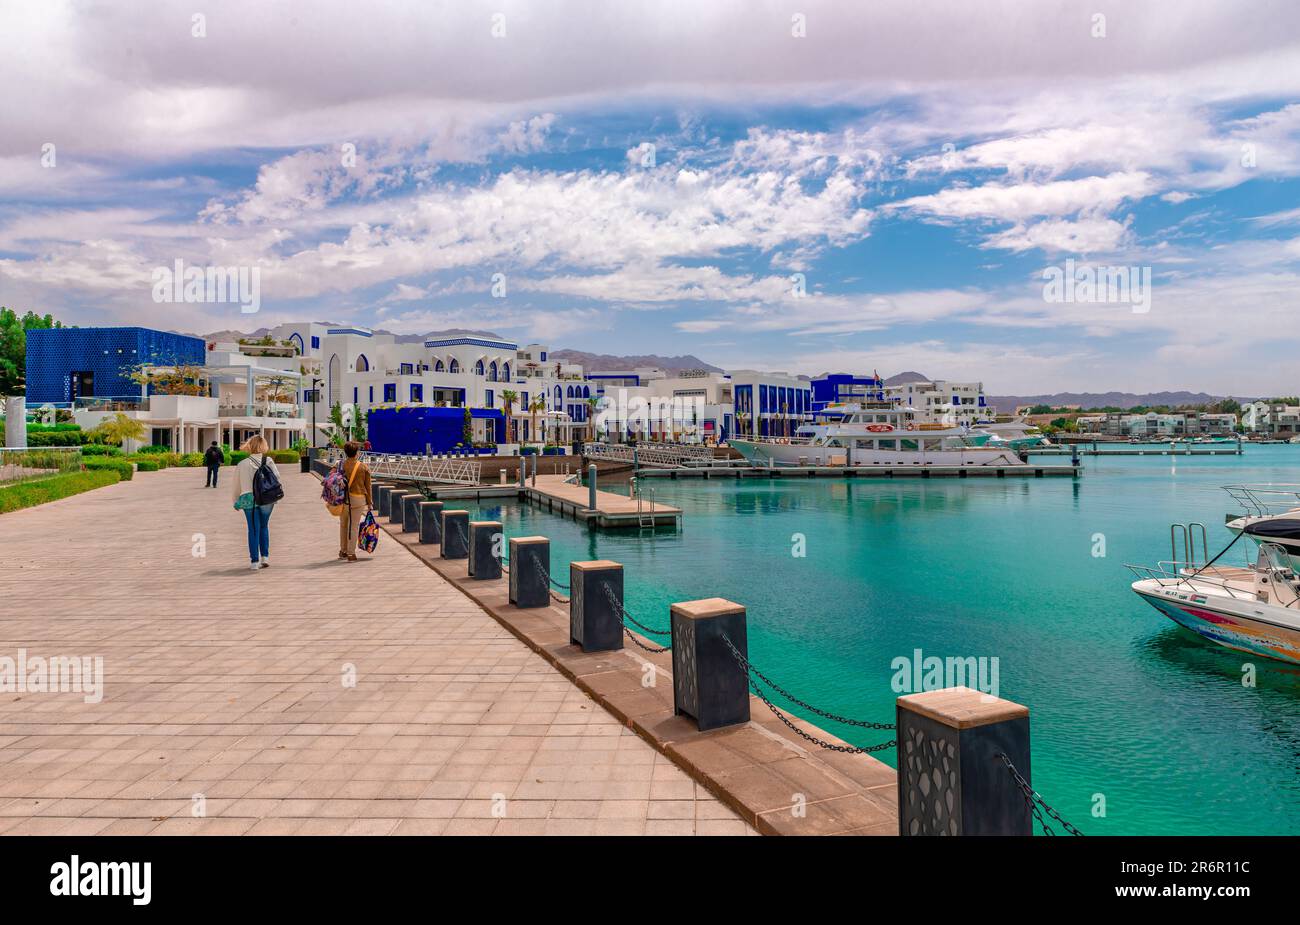 Ayla Oasis, a real estate development project, aiming to create a luxurious waterfront community on the shores of the Read Sea, in Aqaba, Jordan. Stock Photo